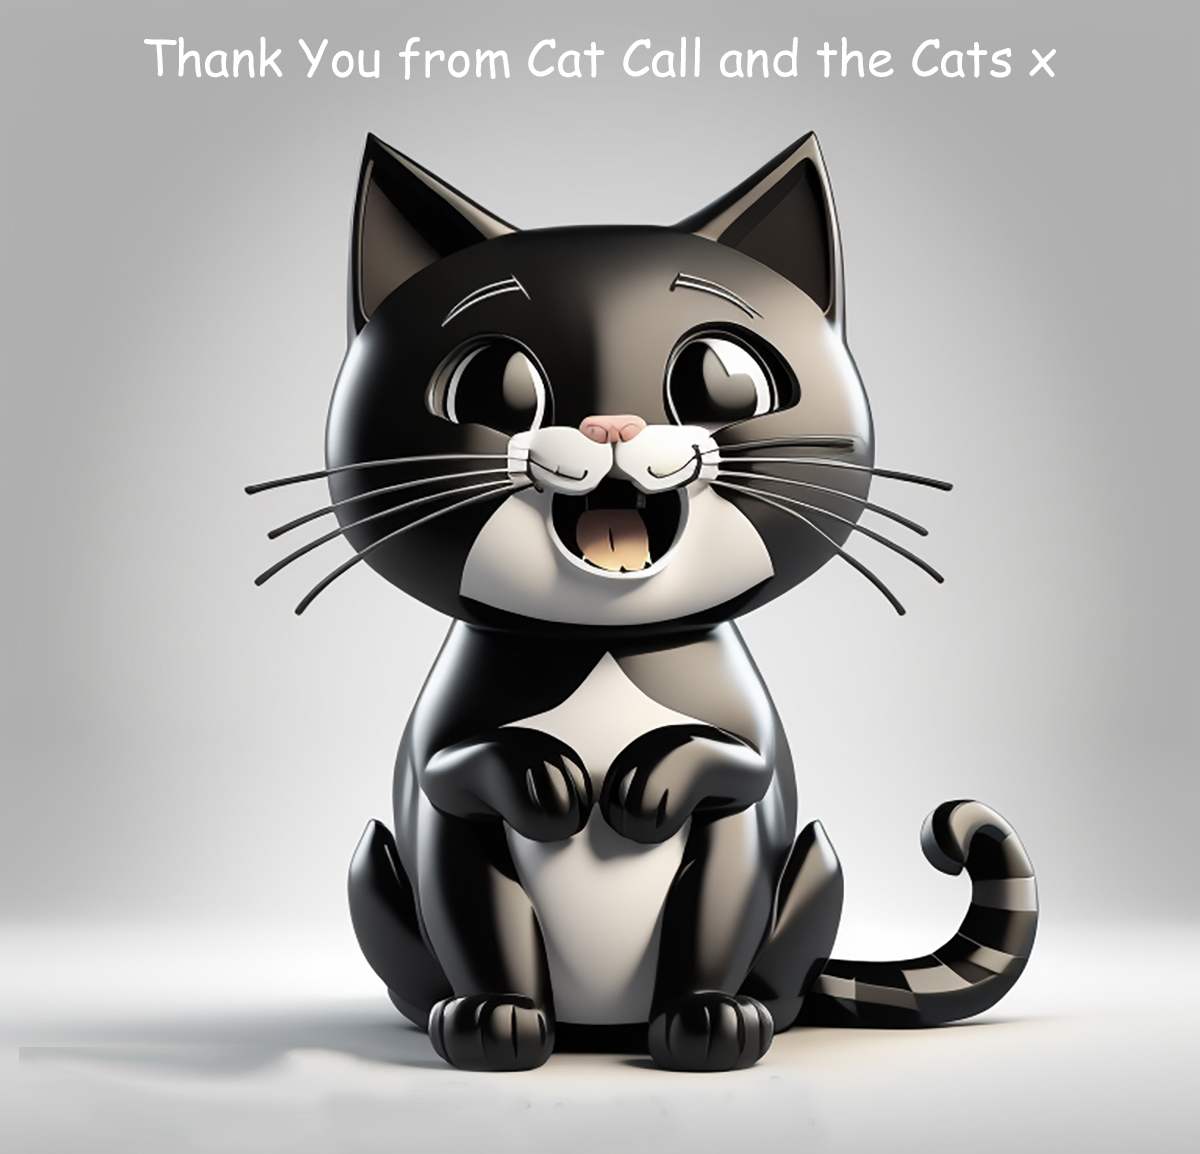 Rescued Cats say thank you x